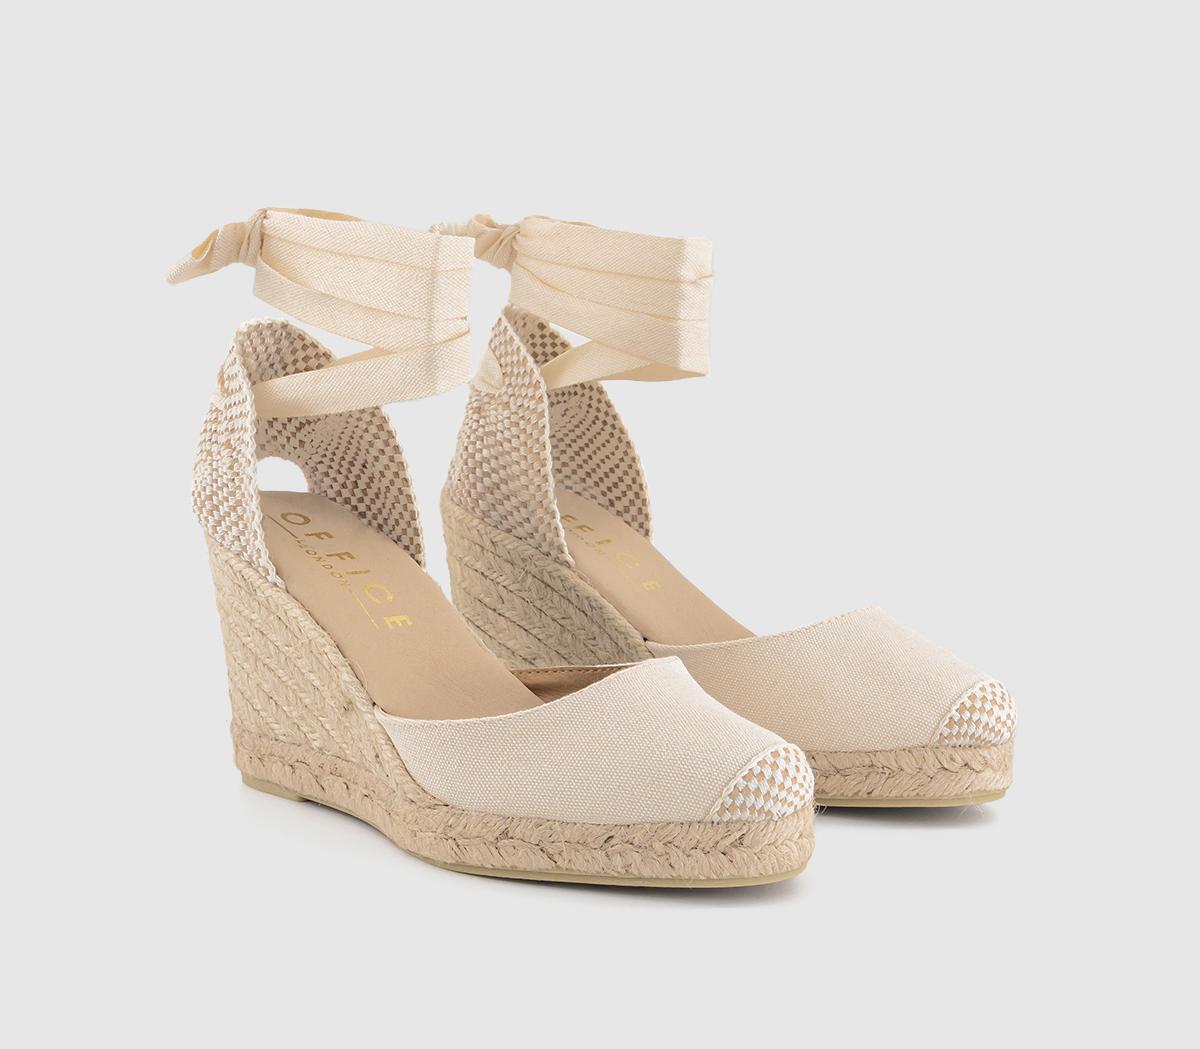 OFFICE Womens Marmalade Ankle Tie Espadrille Wedges Cream Canvas, 3